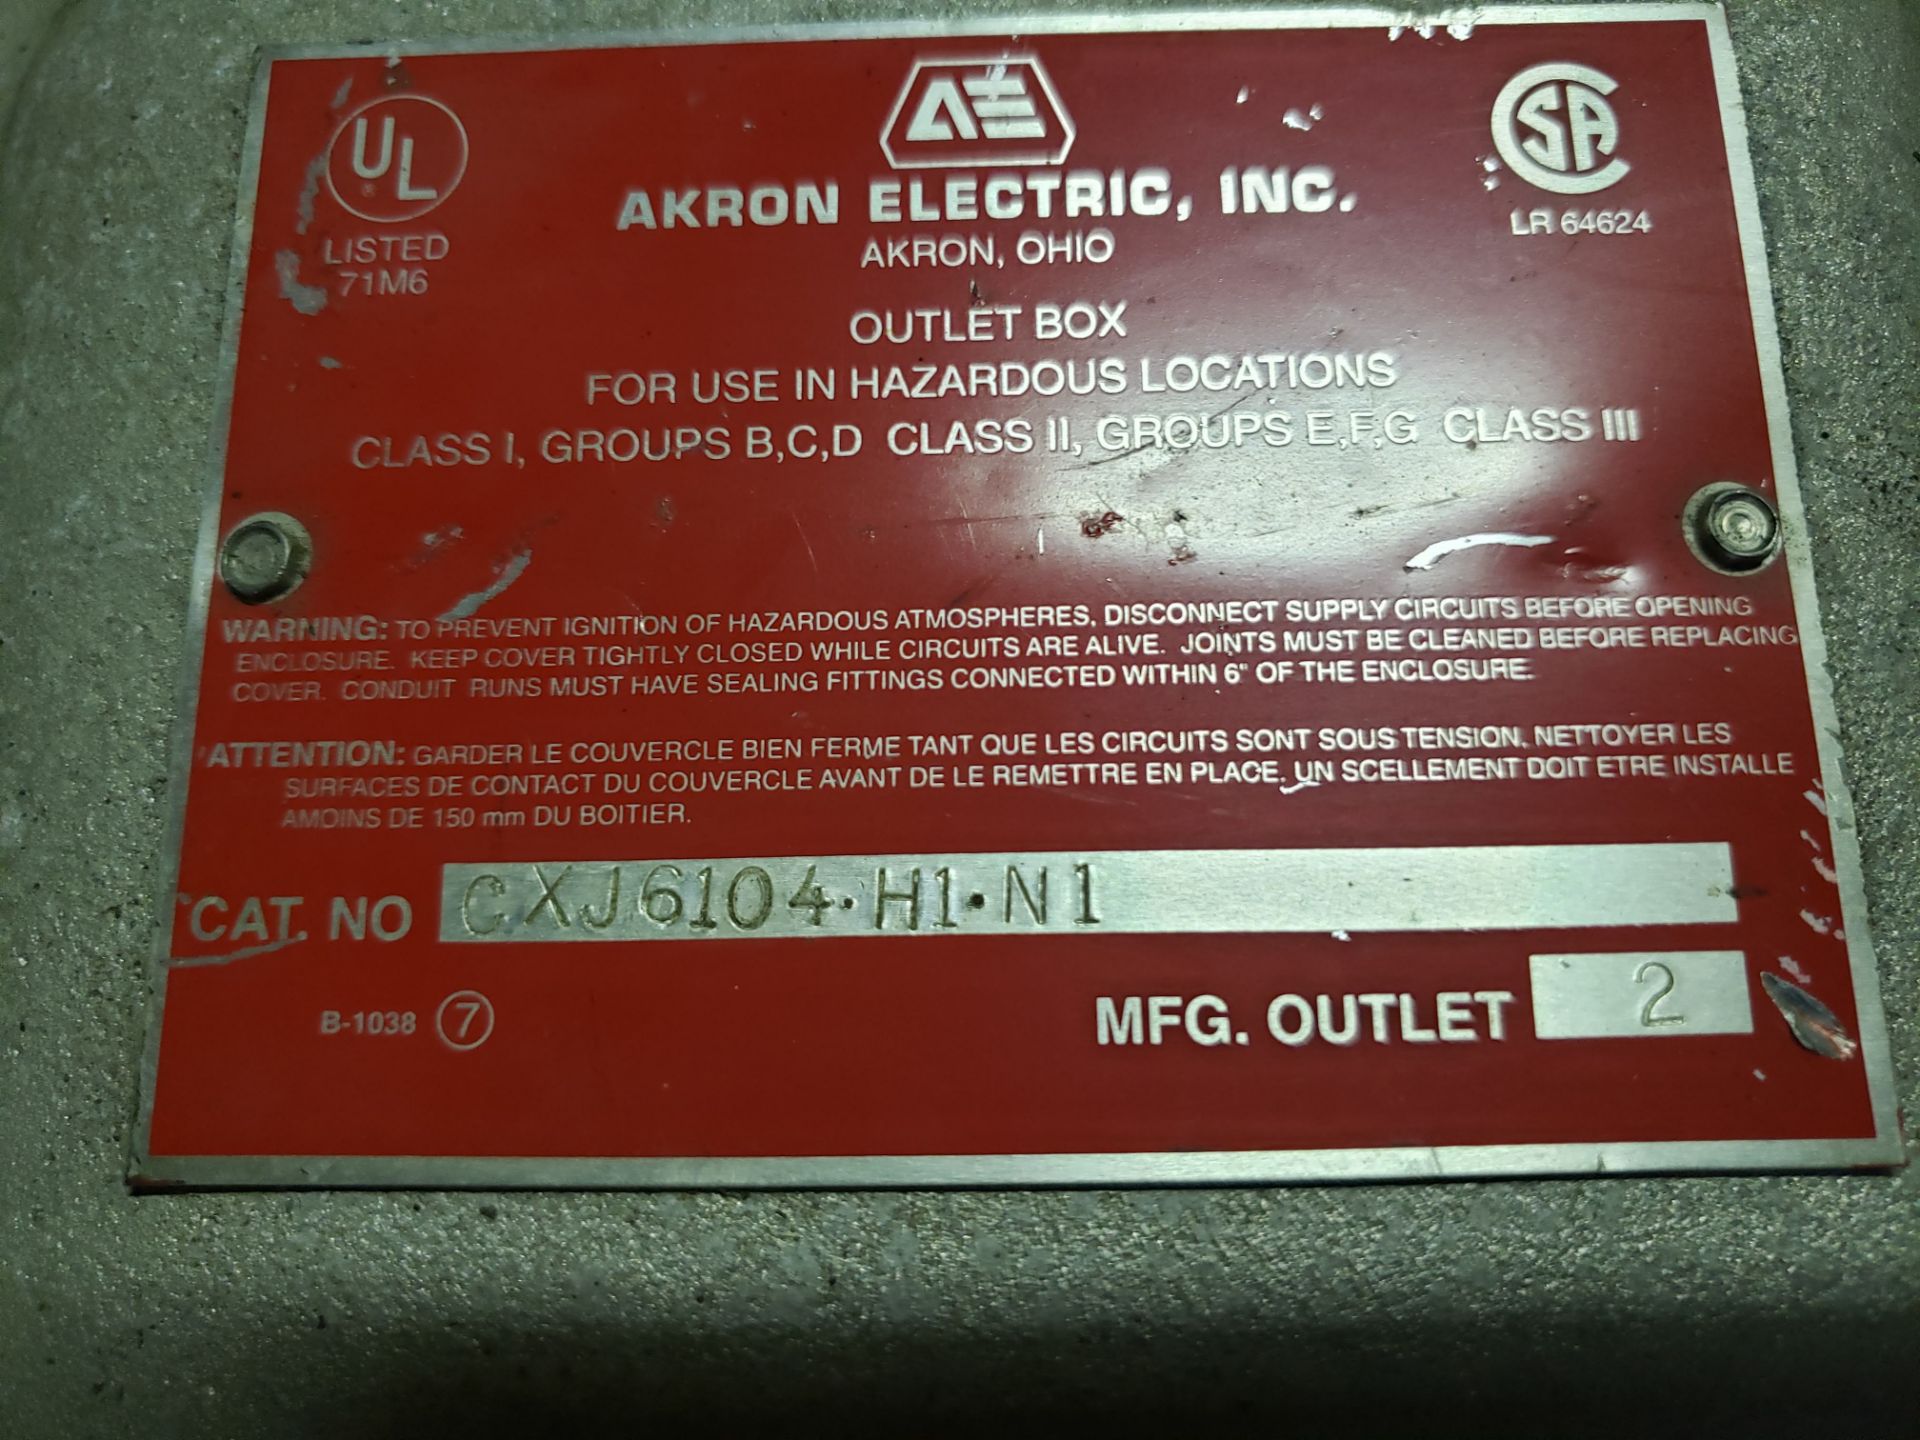 Explosion proof box - Part # CXJ6104H1N1 - Image 3 of 3